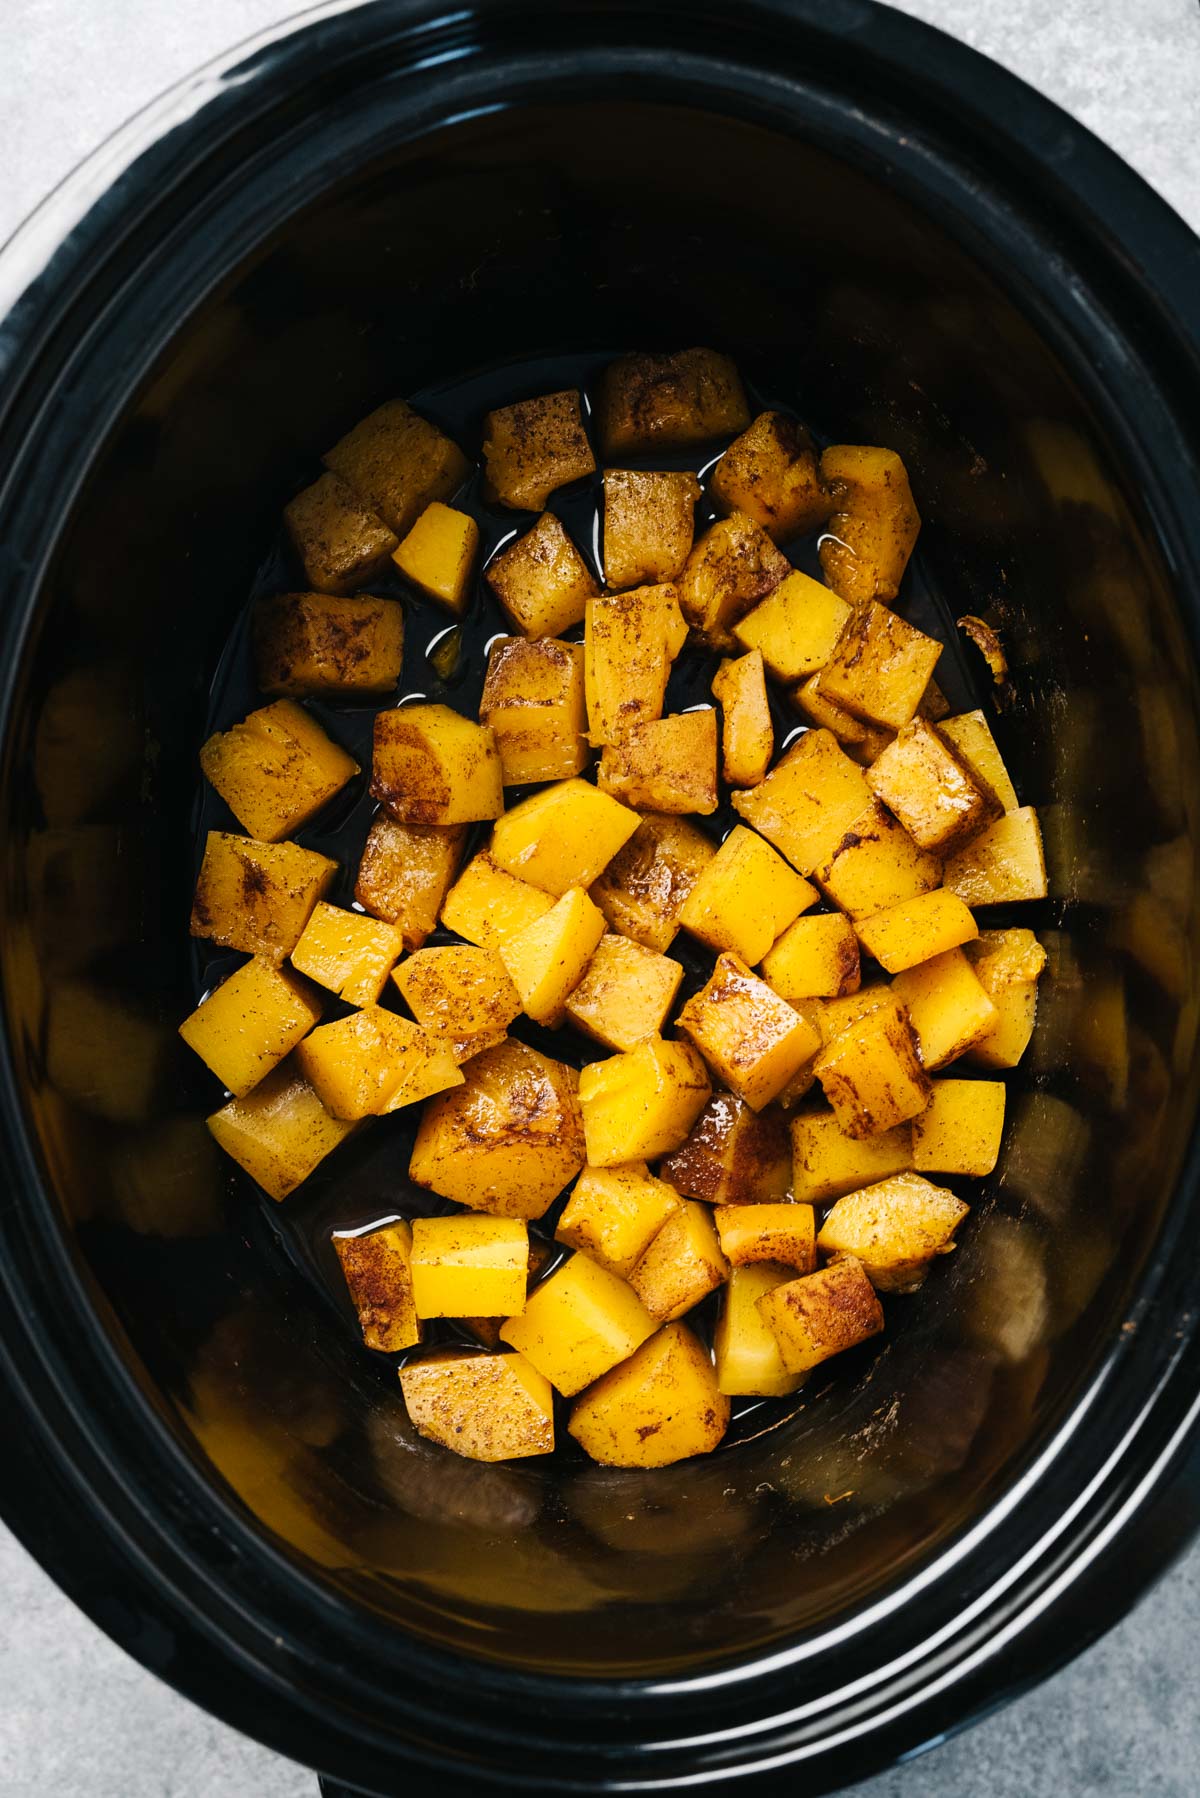 Butternut squash cubes in a slow cooker seasoned with salt, cinnamon, and nutmeg.